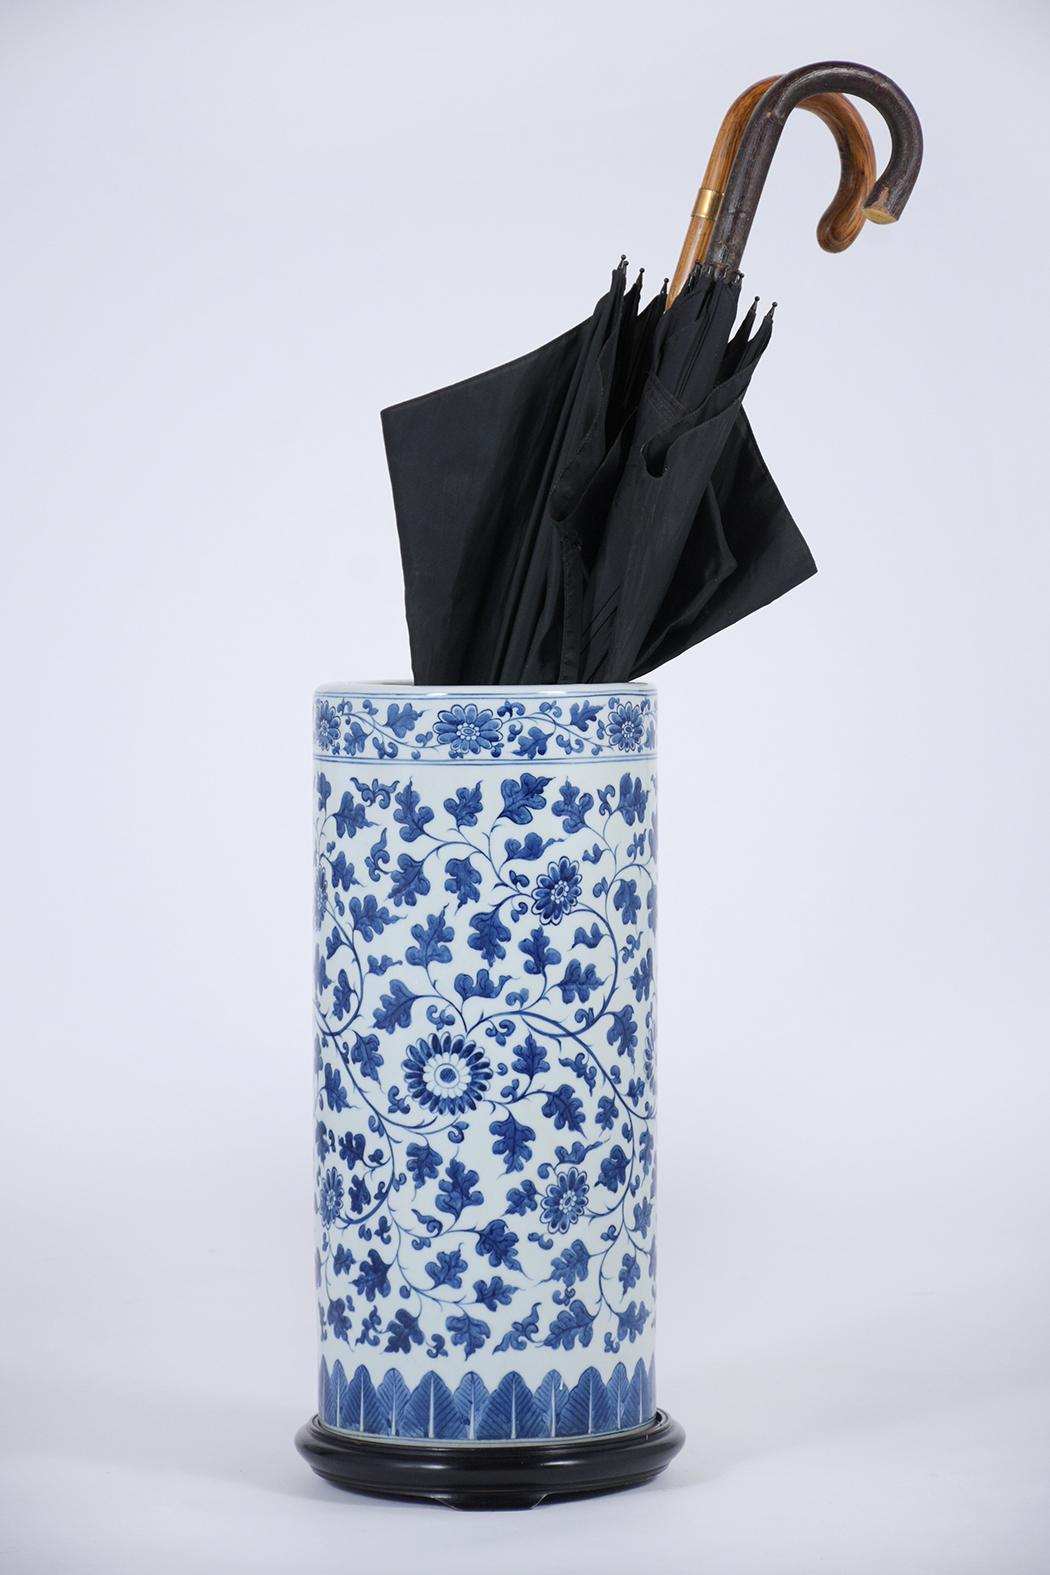 An extraordinary Chinese umbrella stand crafted out of porcelain in great condition. This vase features remarkable hand-painted flowers and leaves details design, resting on a carved wood base with an ebonized finish. This eye-catching umbrella